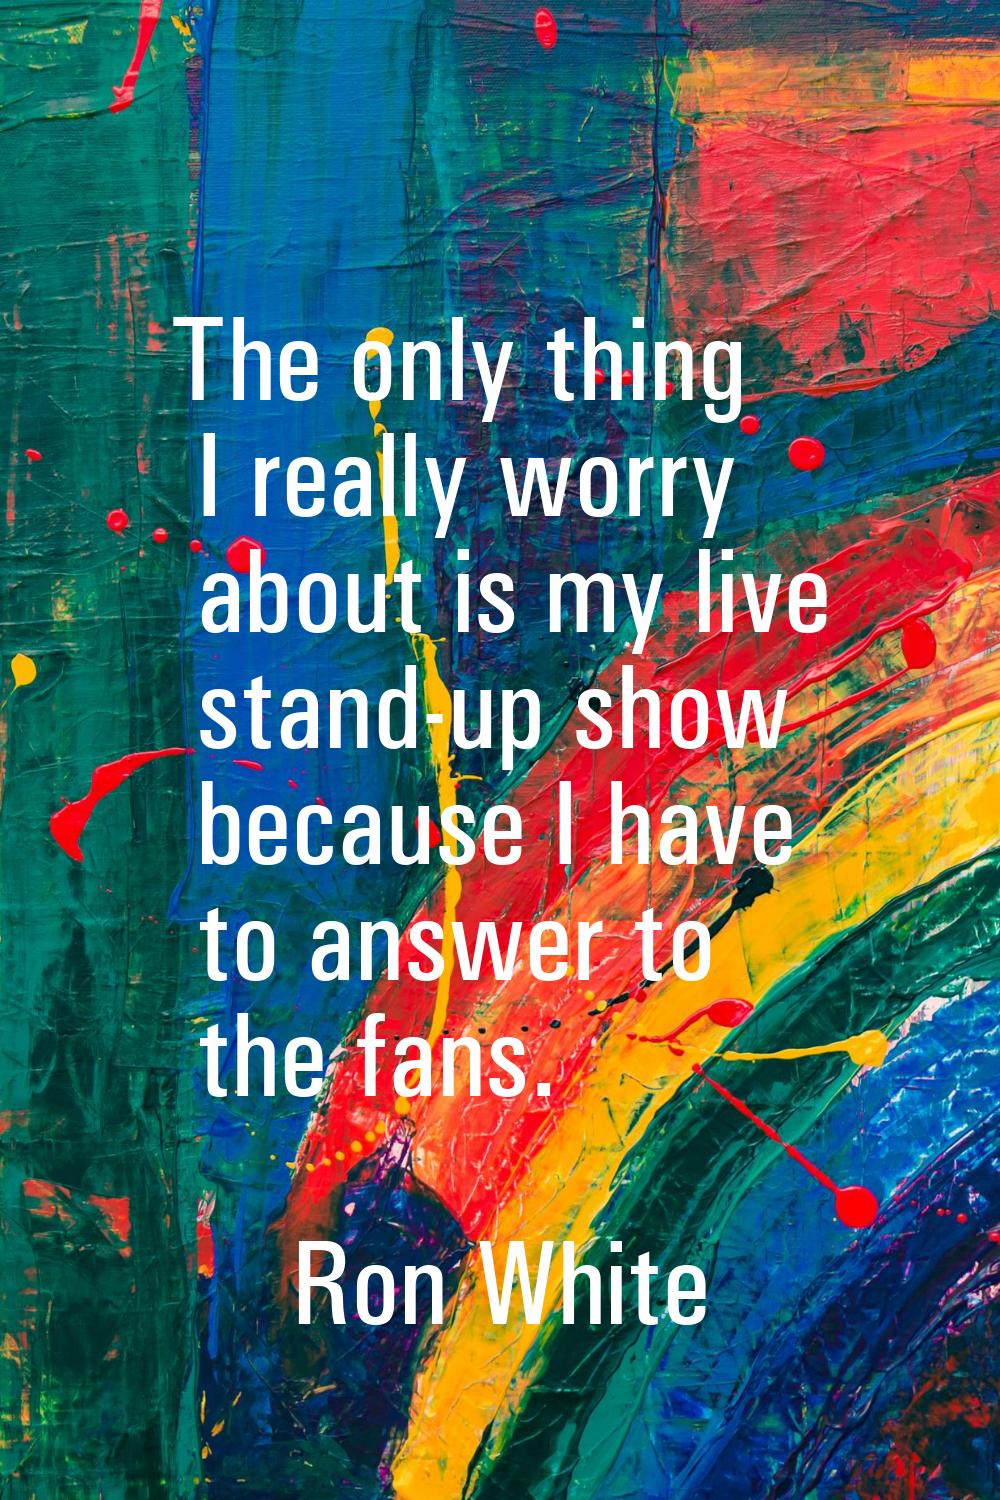 The only thing I really worry about is my live stand-up show because I have to answer to the fans.